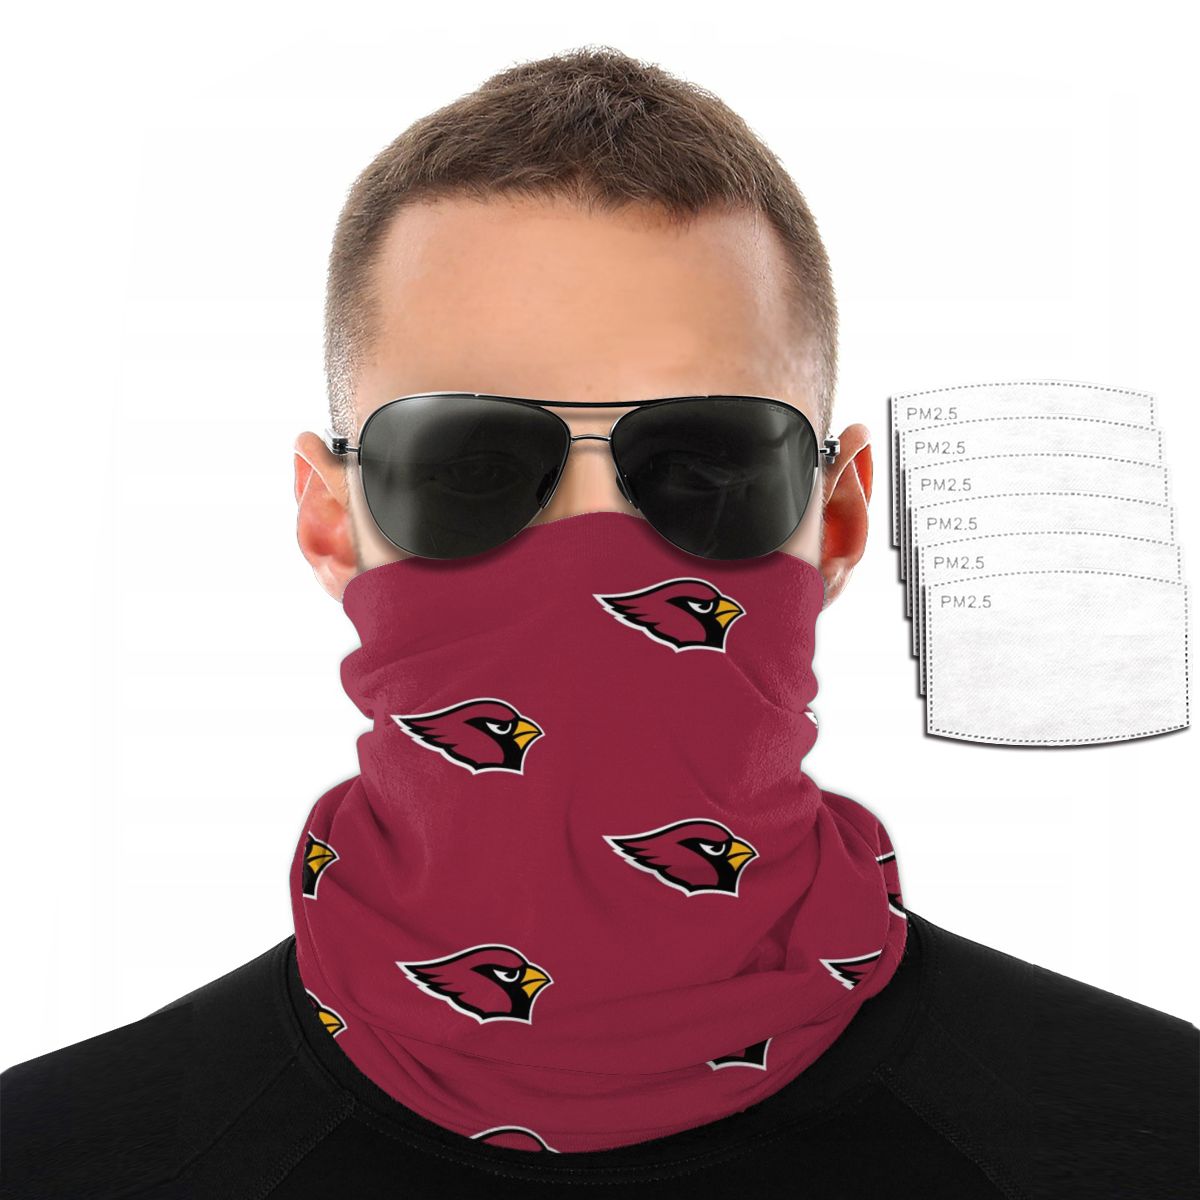 Reusble Mouth Cover Bandanas Arizona Cardinals Variety Head Scarf Face Mask With PM 2.5 Filter